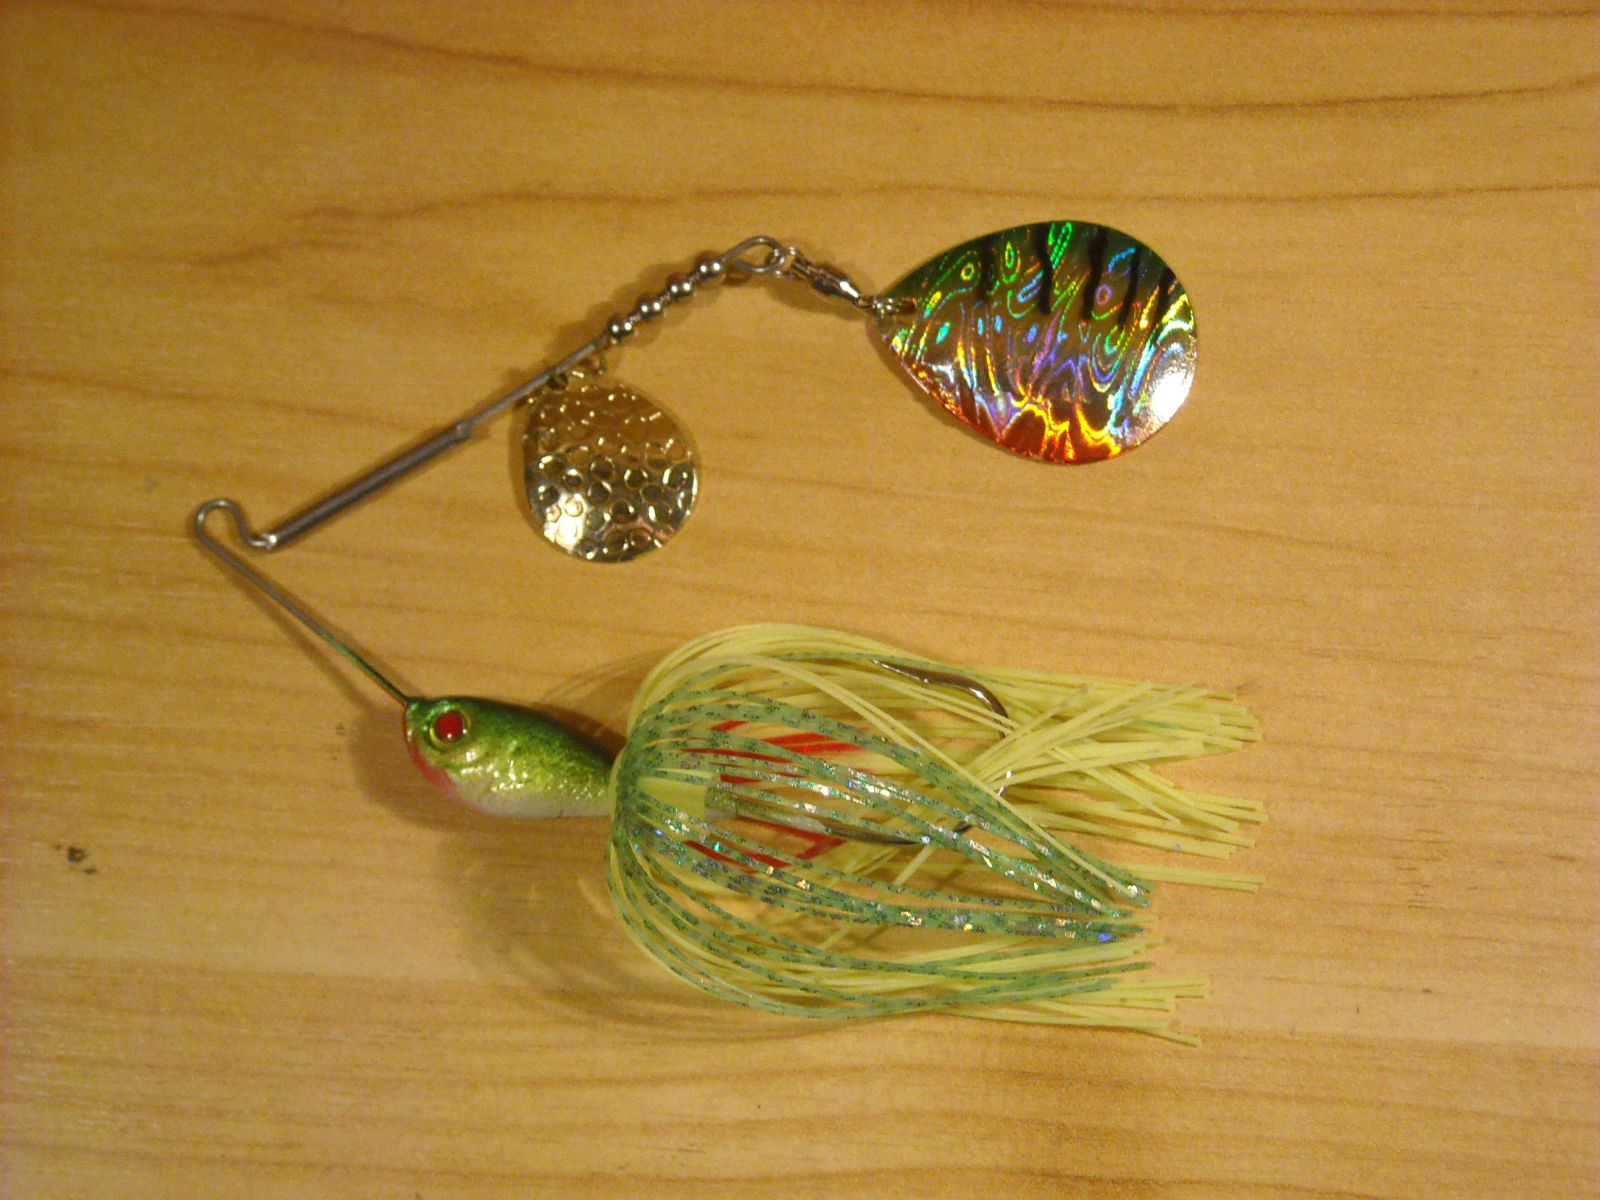 SpinnerBaits - Page 6 -  - Tackle Building Forums